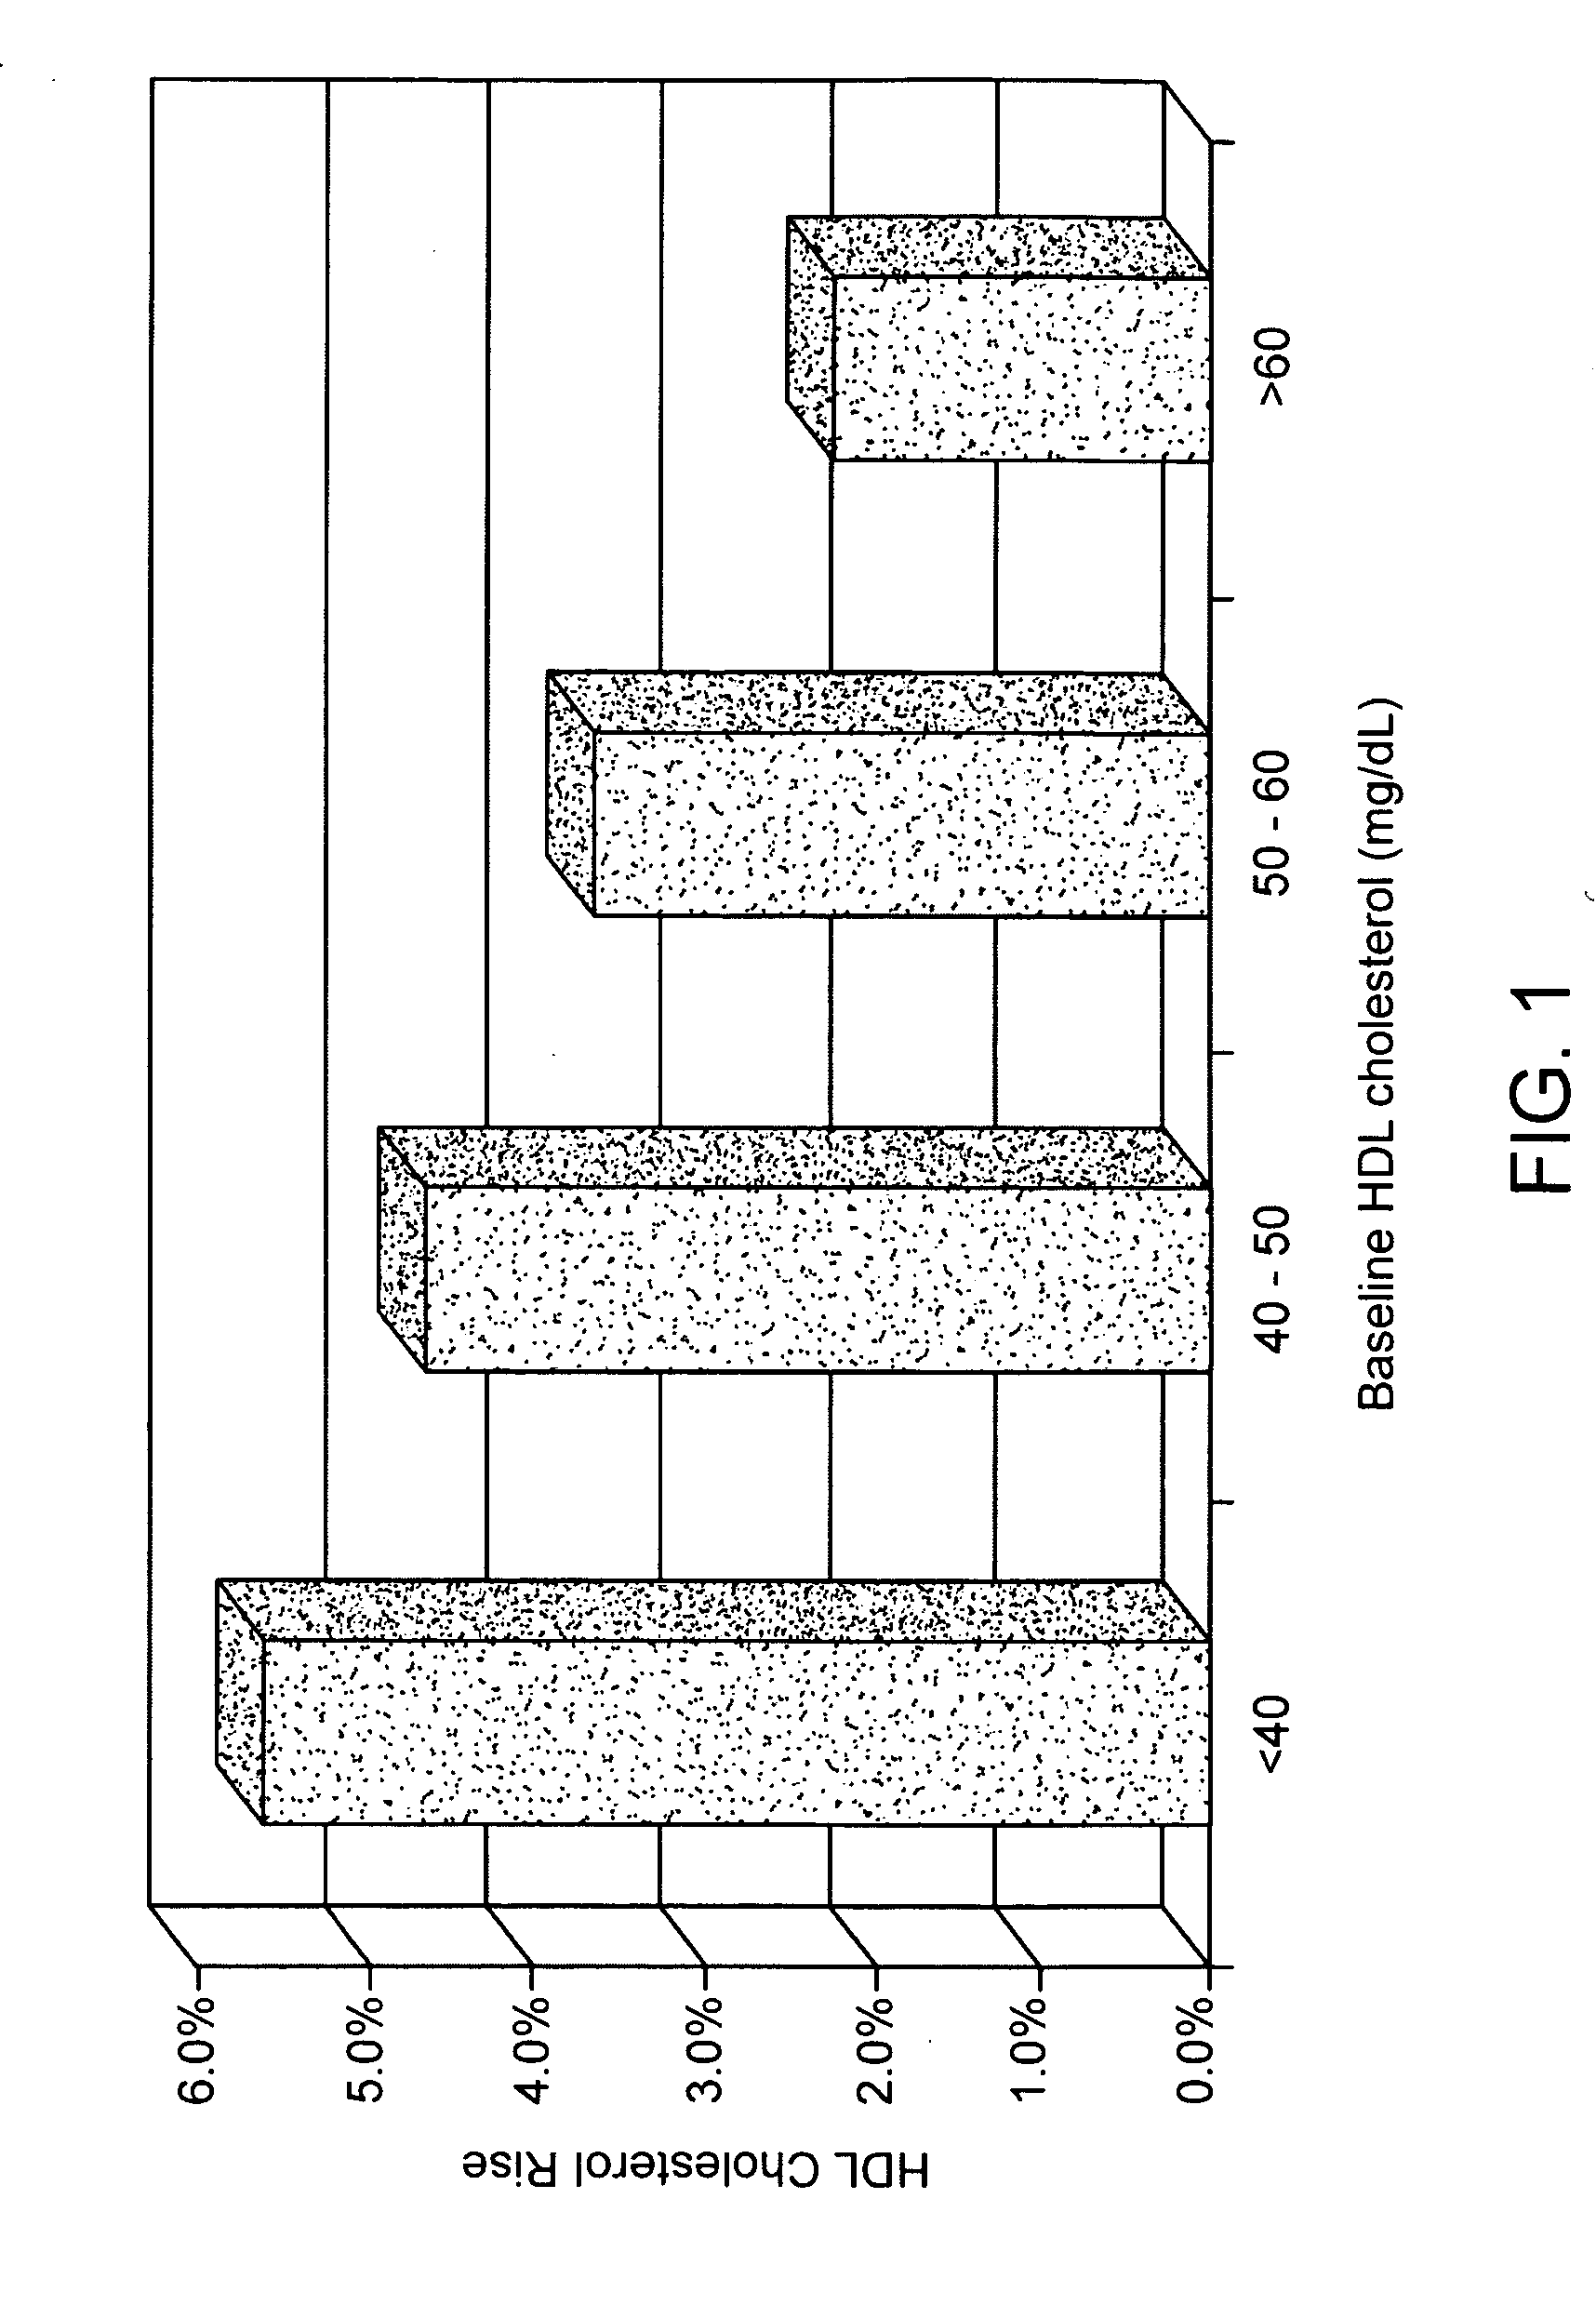 Methods of treating Syndrome X with aliphatic polyamines